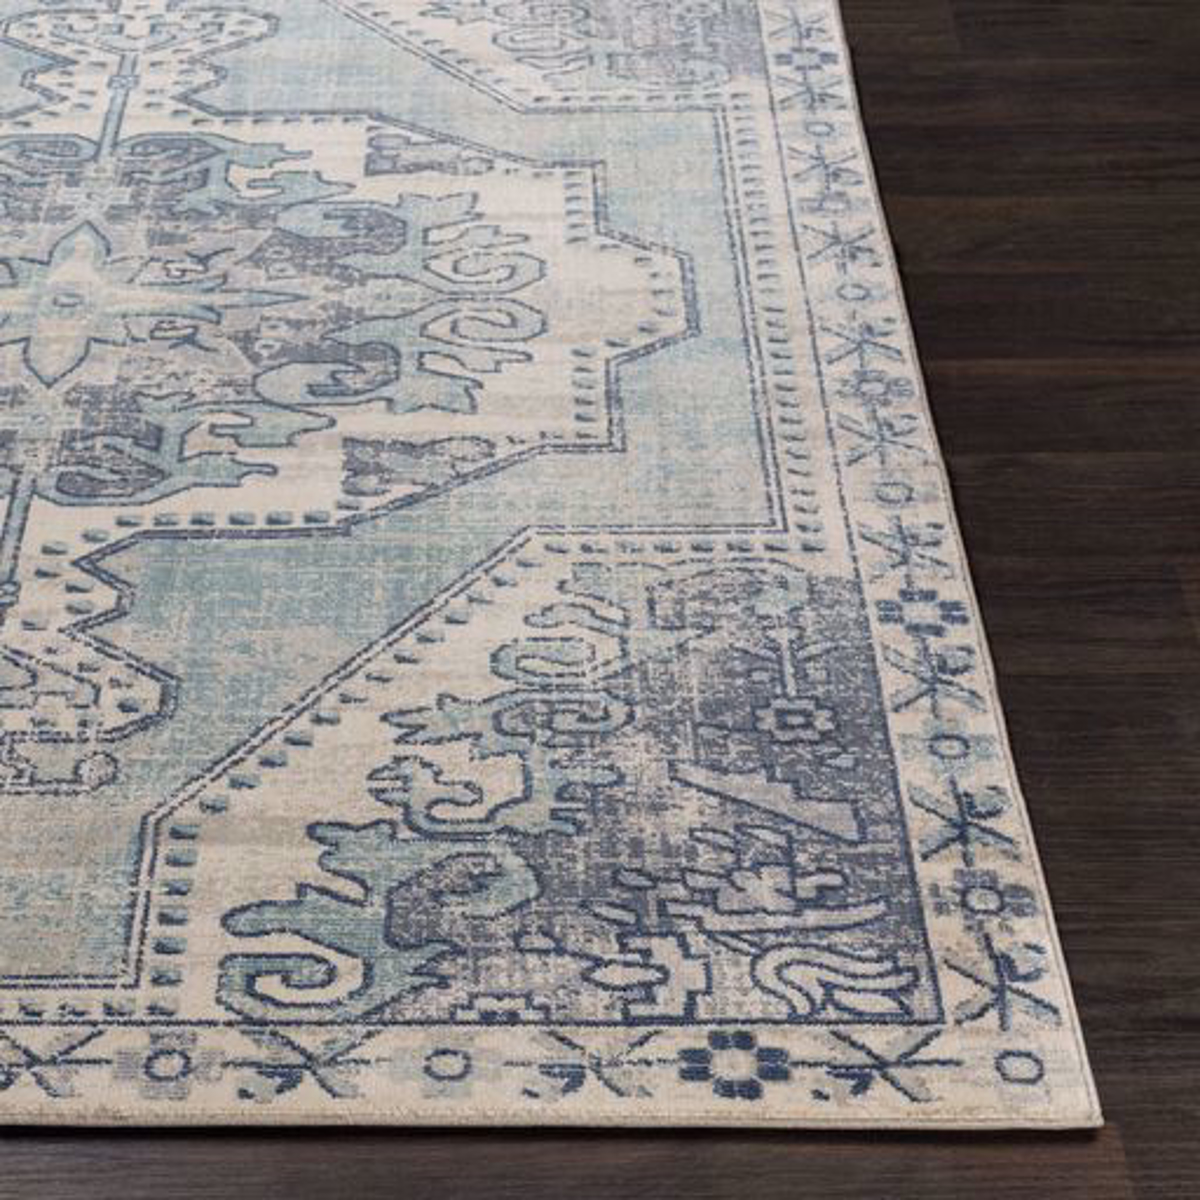 Picture of Bohemian 2301 5'3"X7'4" Area Rug